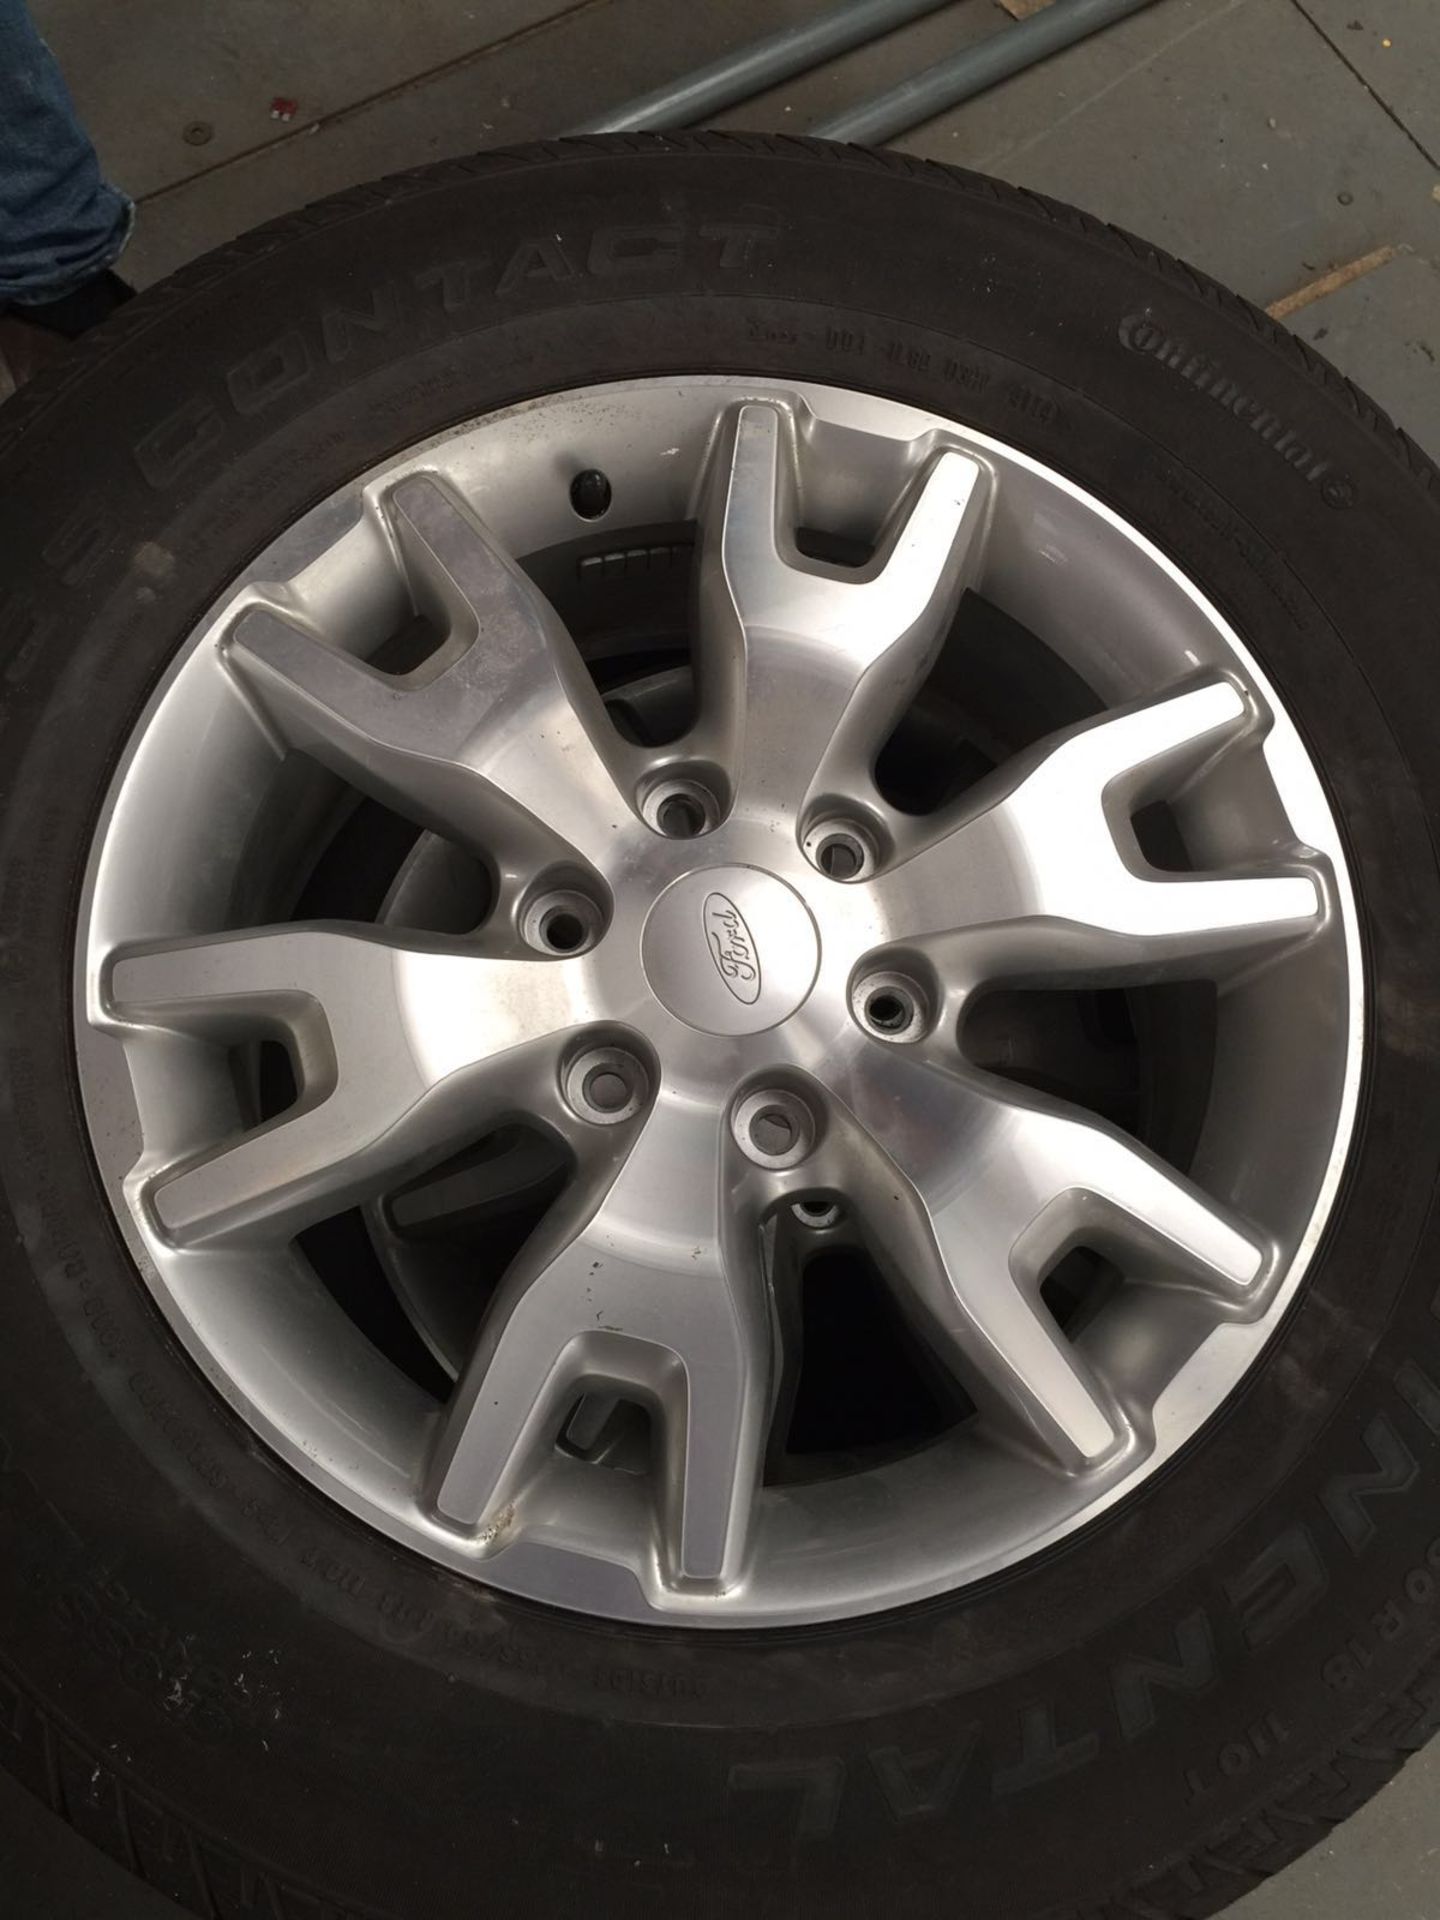 SET OF 4 2016 18" FORD RANGER ALLOY WHEELS WITH CONTINENTAL CROSS CONTACT TYRES ONLY 100 MILES